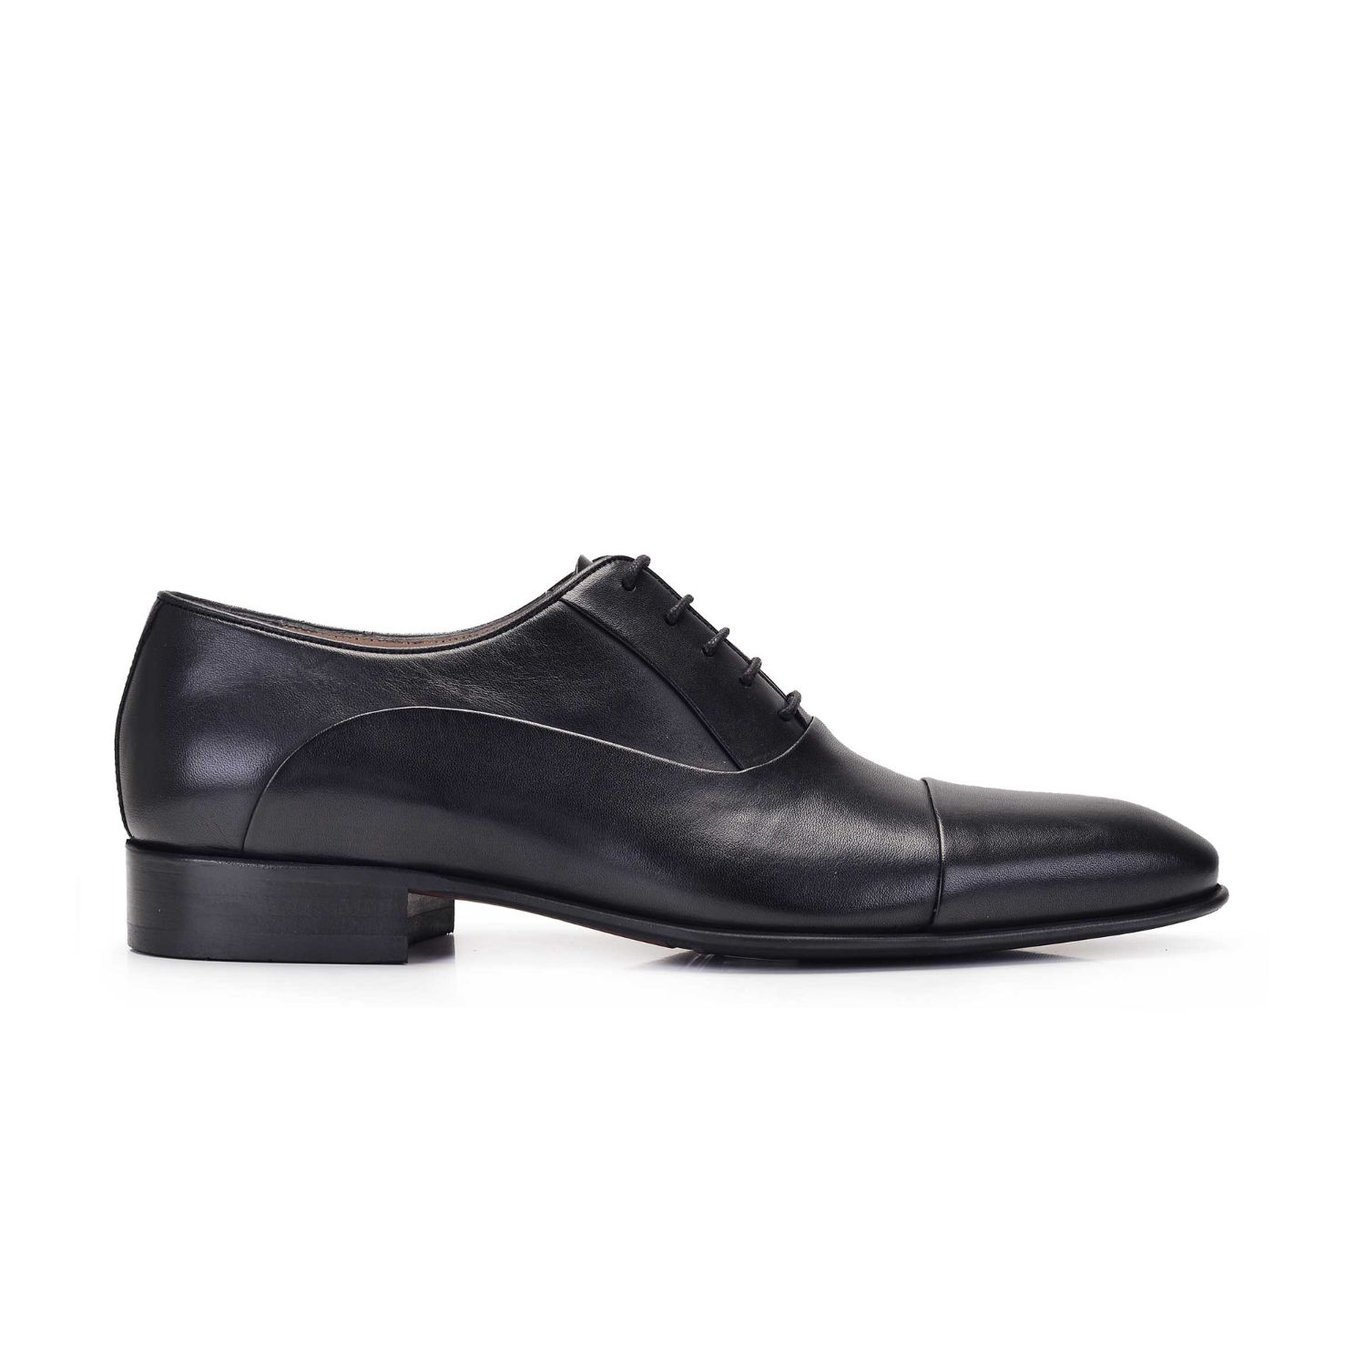 Nevzat Onay Genuine Leather Black Men Classical Shoes -11696-